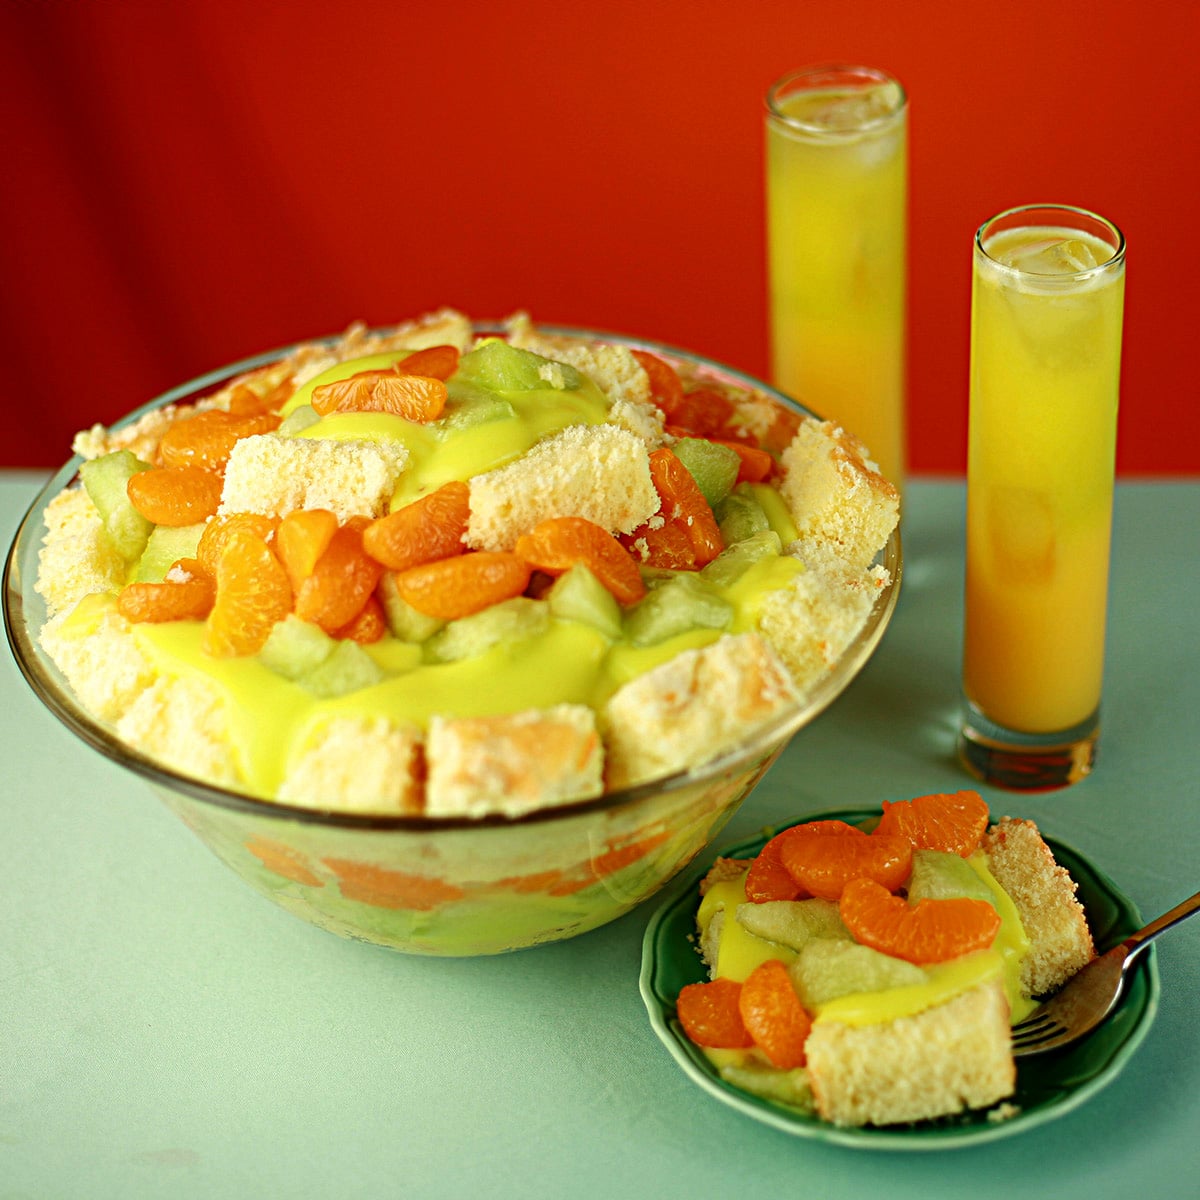 Trifle is an easy dessert, and one that's sure to impress. This Melon Ball Trifle is from my book, “The Spirited Baker”, themed on a favourite cocktail!